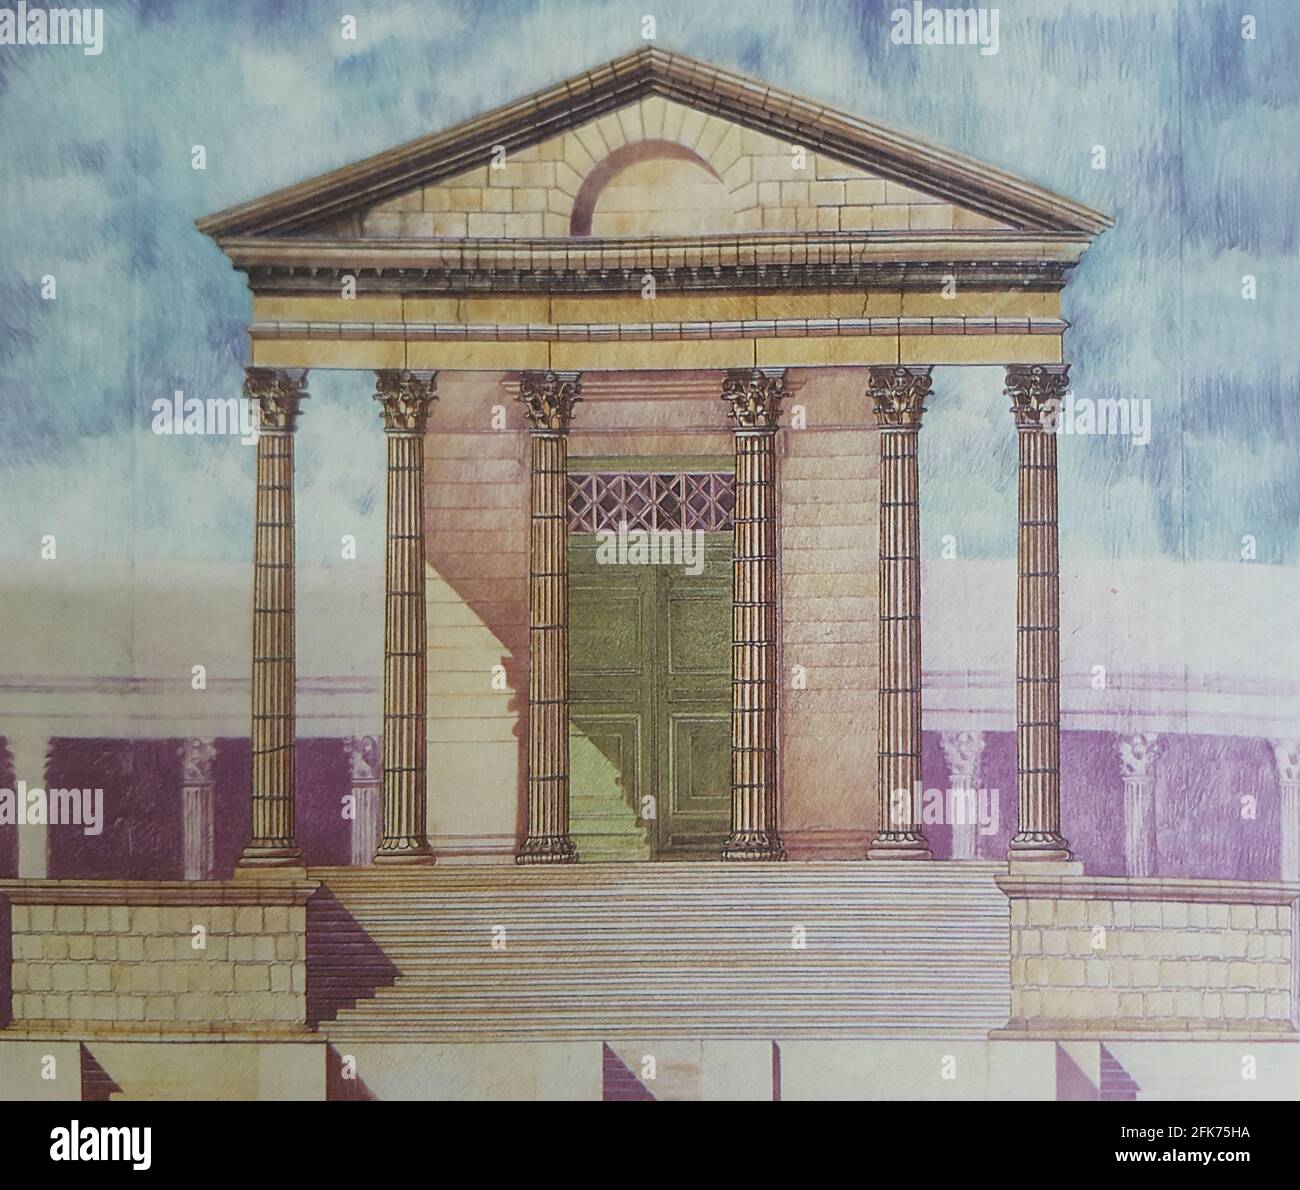 Temple of Diana facade, Hypothetical depiction by Dionisio Hernandez, Merida, Extremadura, Spain. Best-preserved Roman temple in Spain Stock Photo